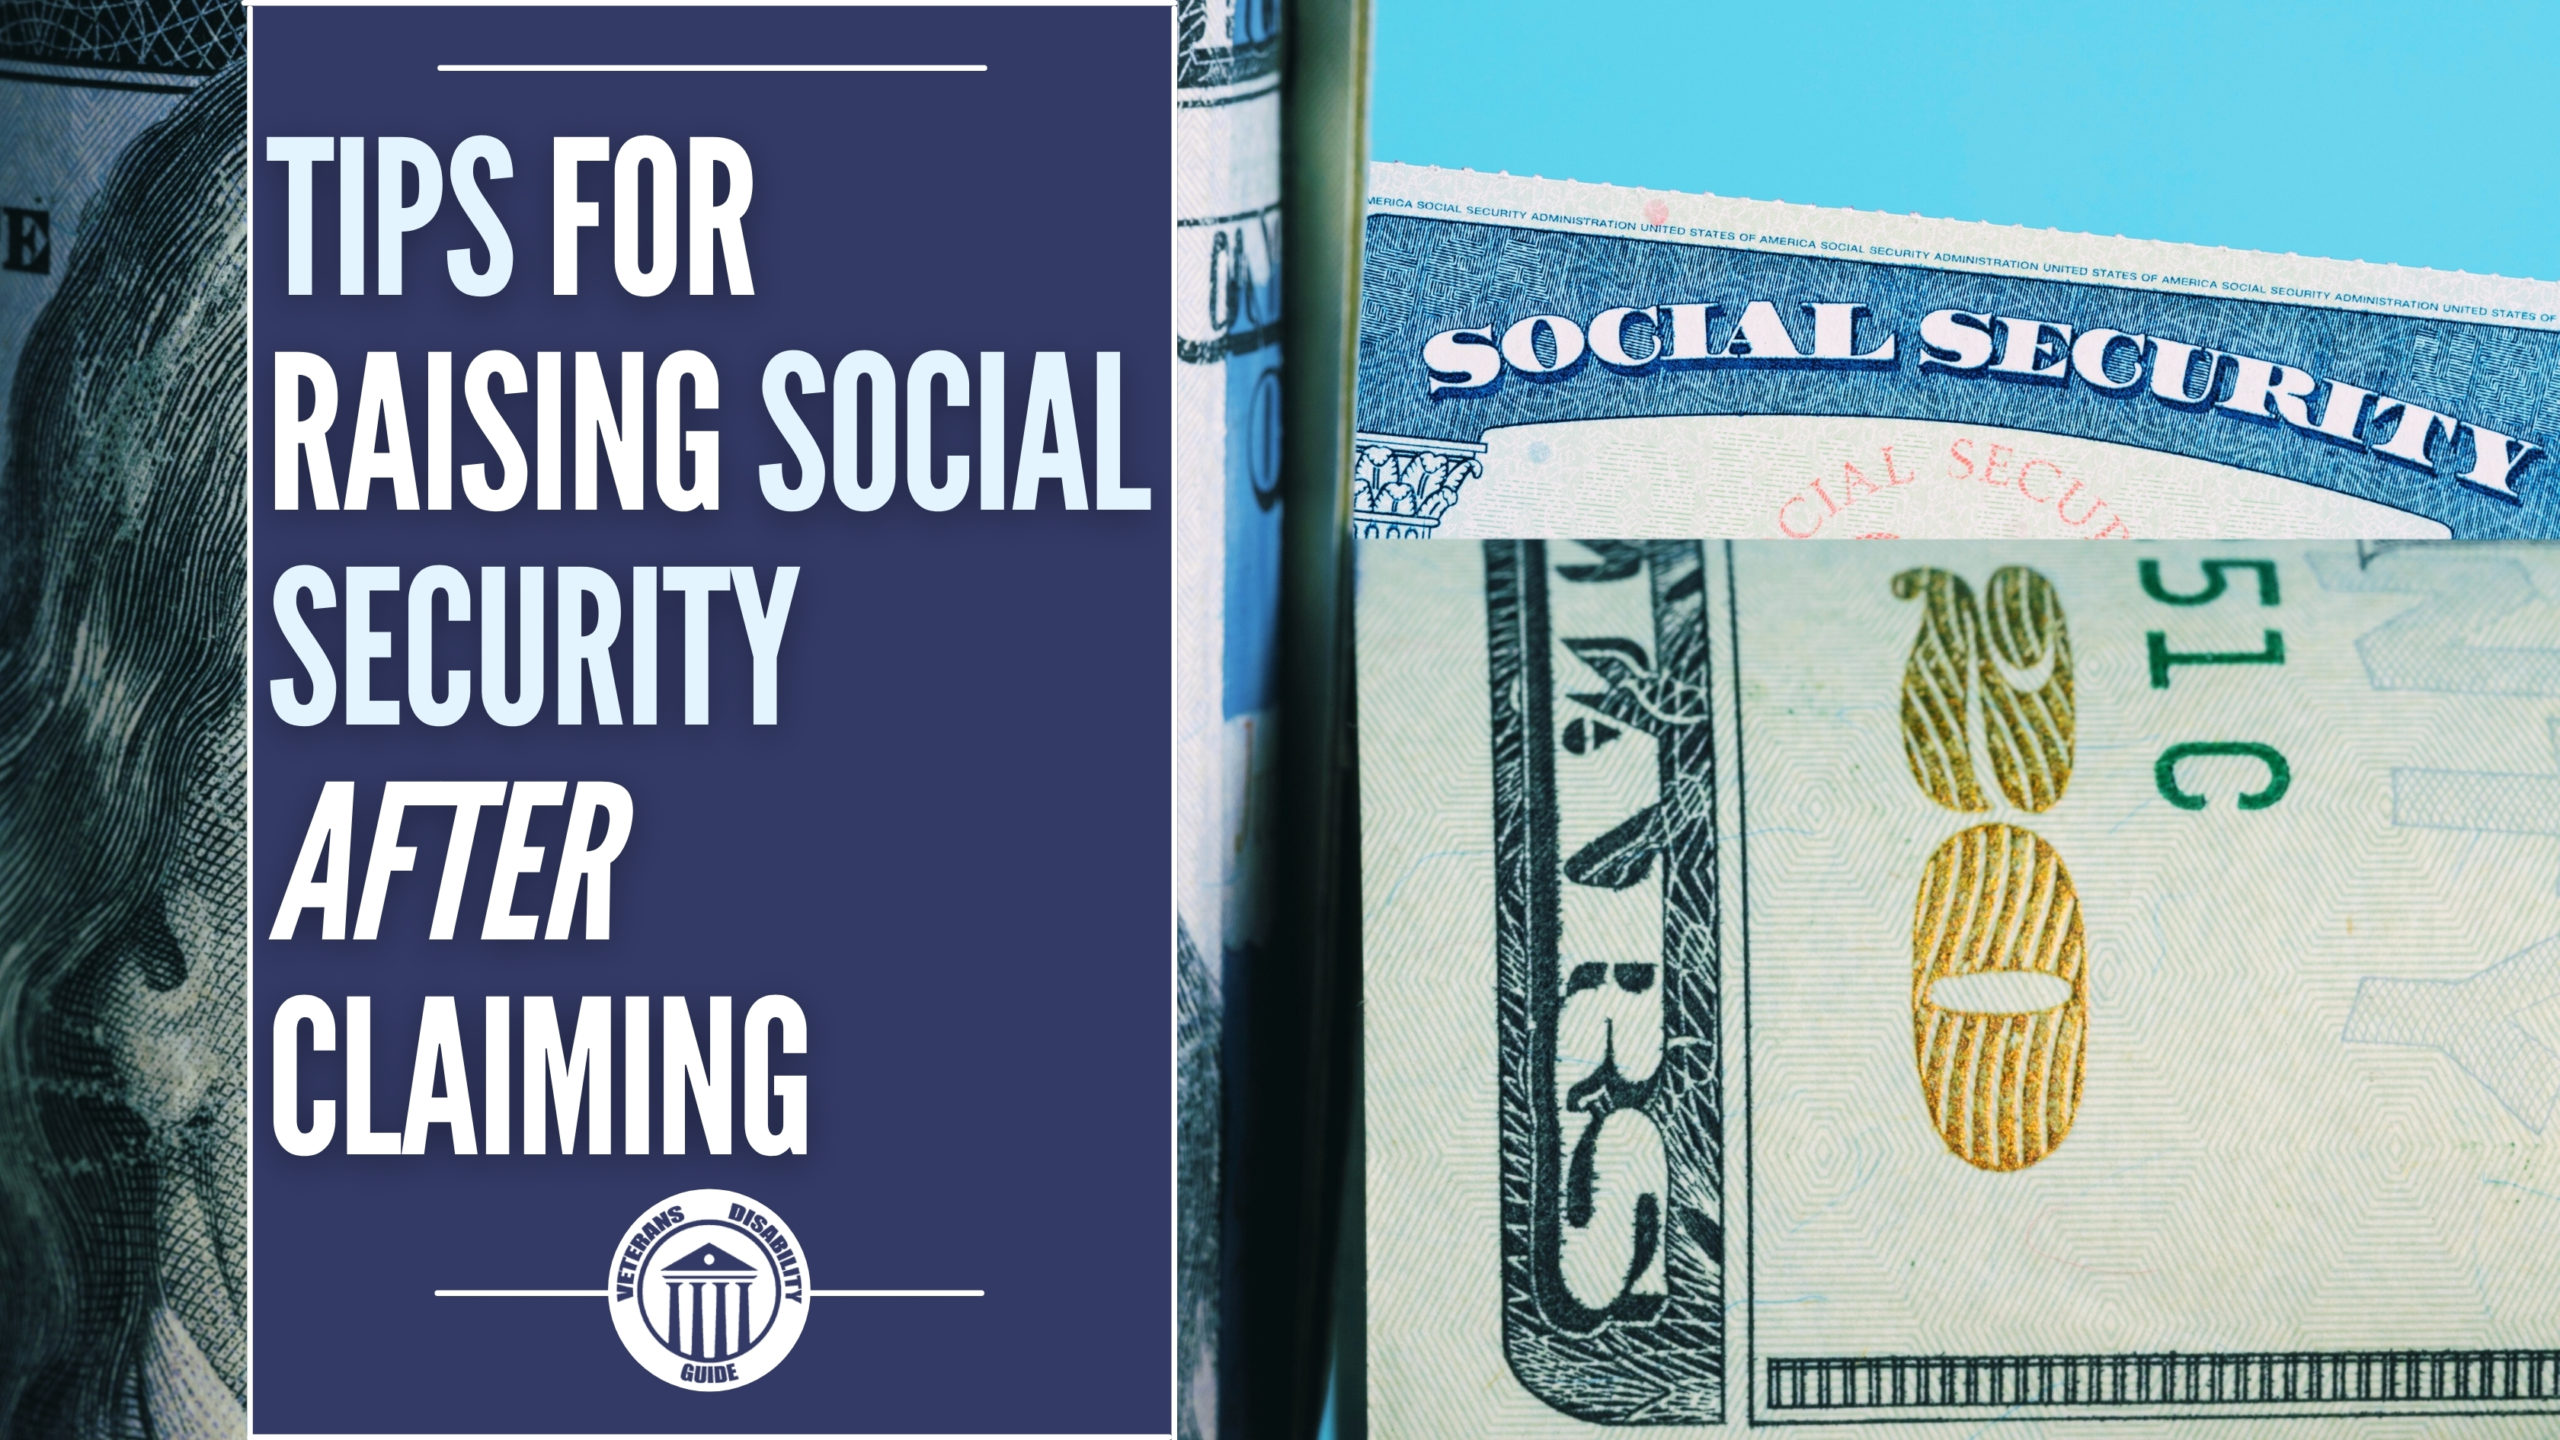 Tips for raising social security after claiming blog header